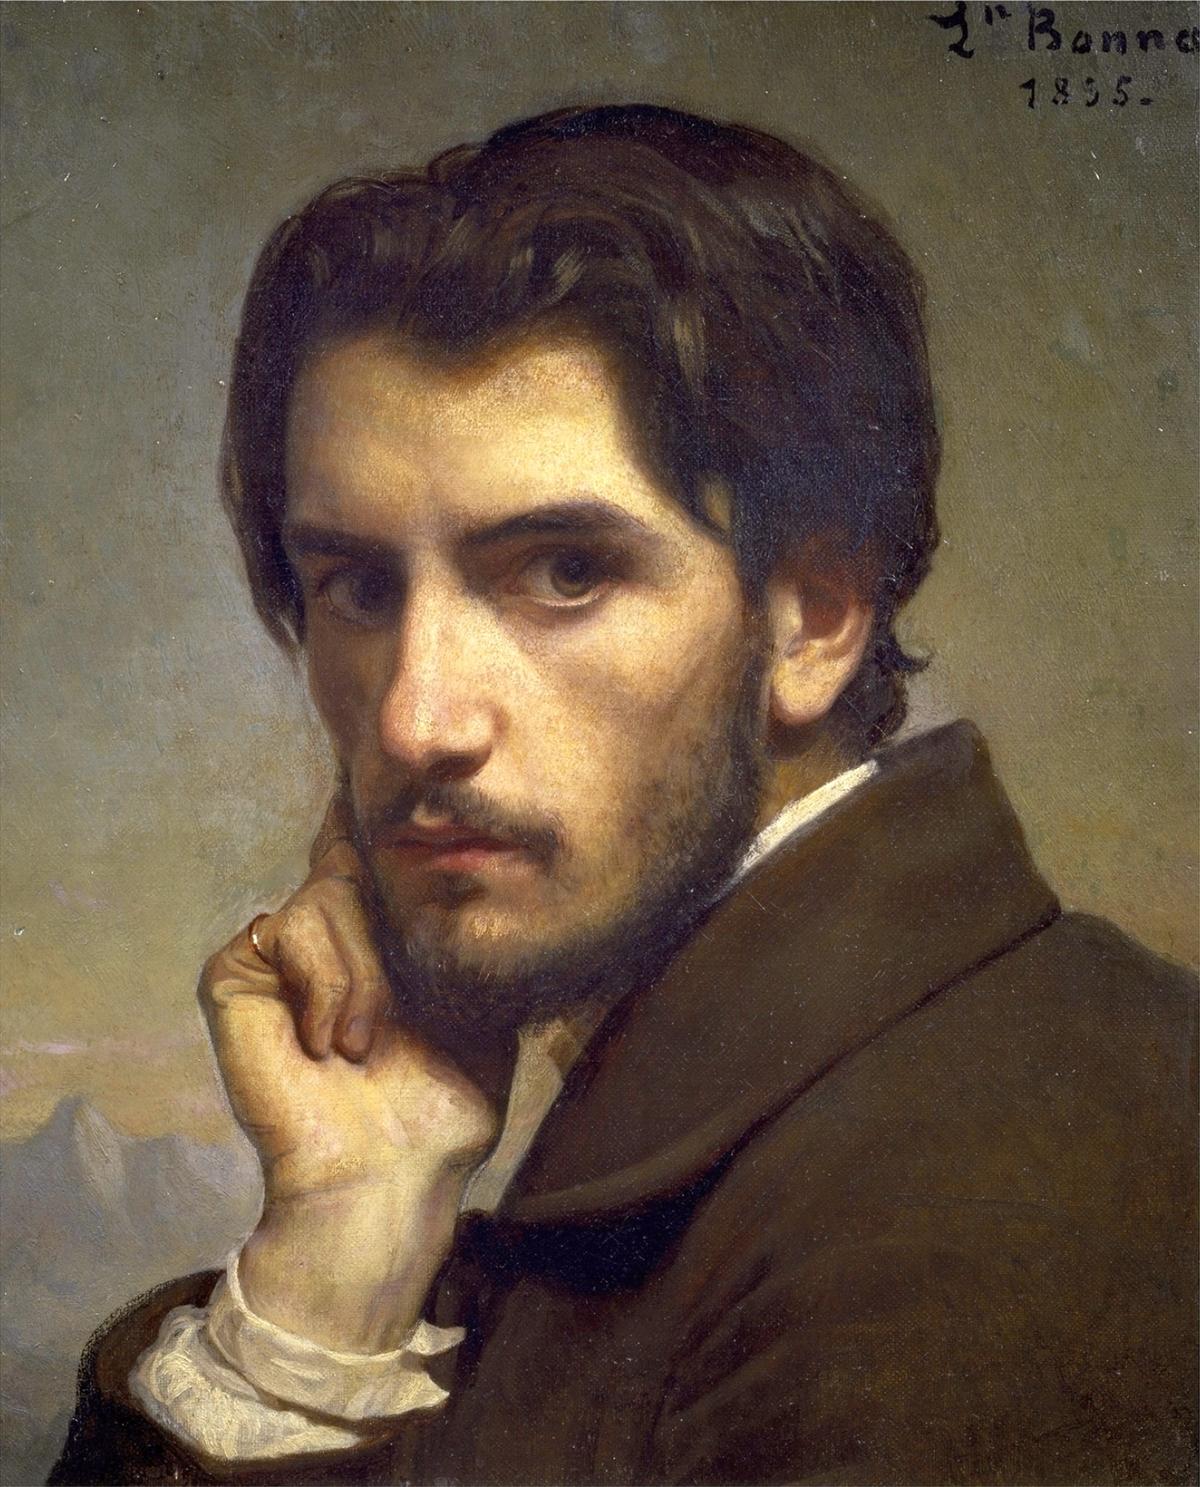 Self-portrait at the age of 22, circa 1855, by Léon Bonnat. Oil on panel; 18 1/10 inches by 14 7/10 inches. Orsay Museum, Paris. (Public Domain)